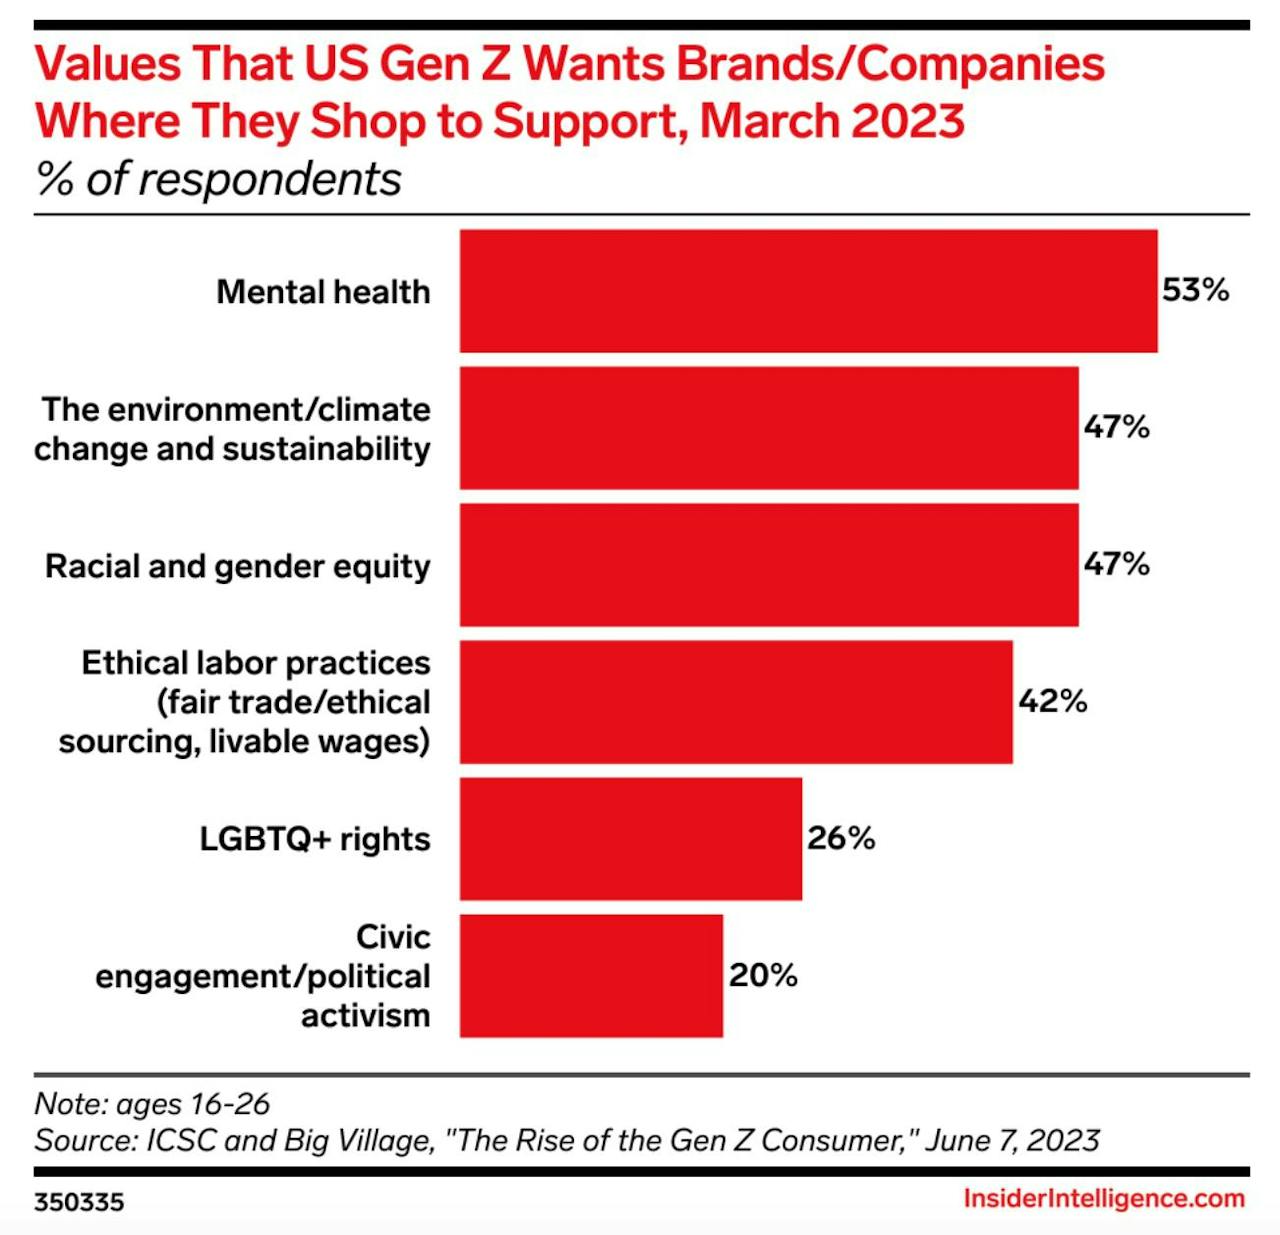 Values That US Gen Z Wants Brands/Companies Where They Shop To Support, March 2023